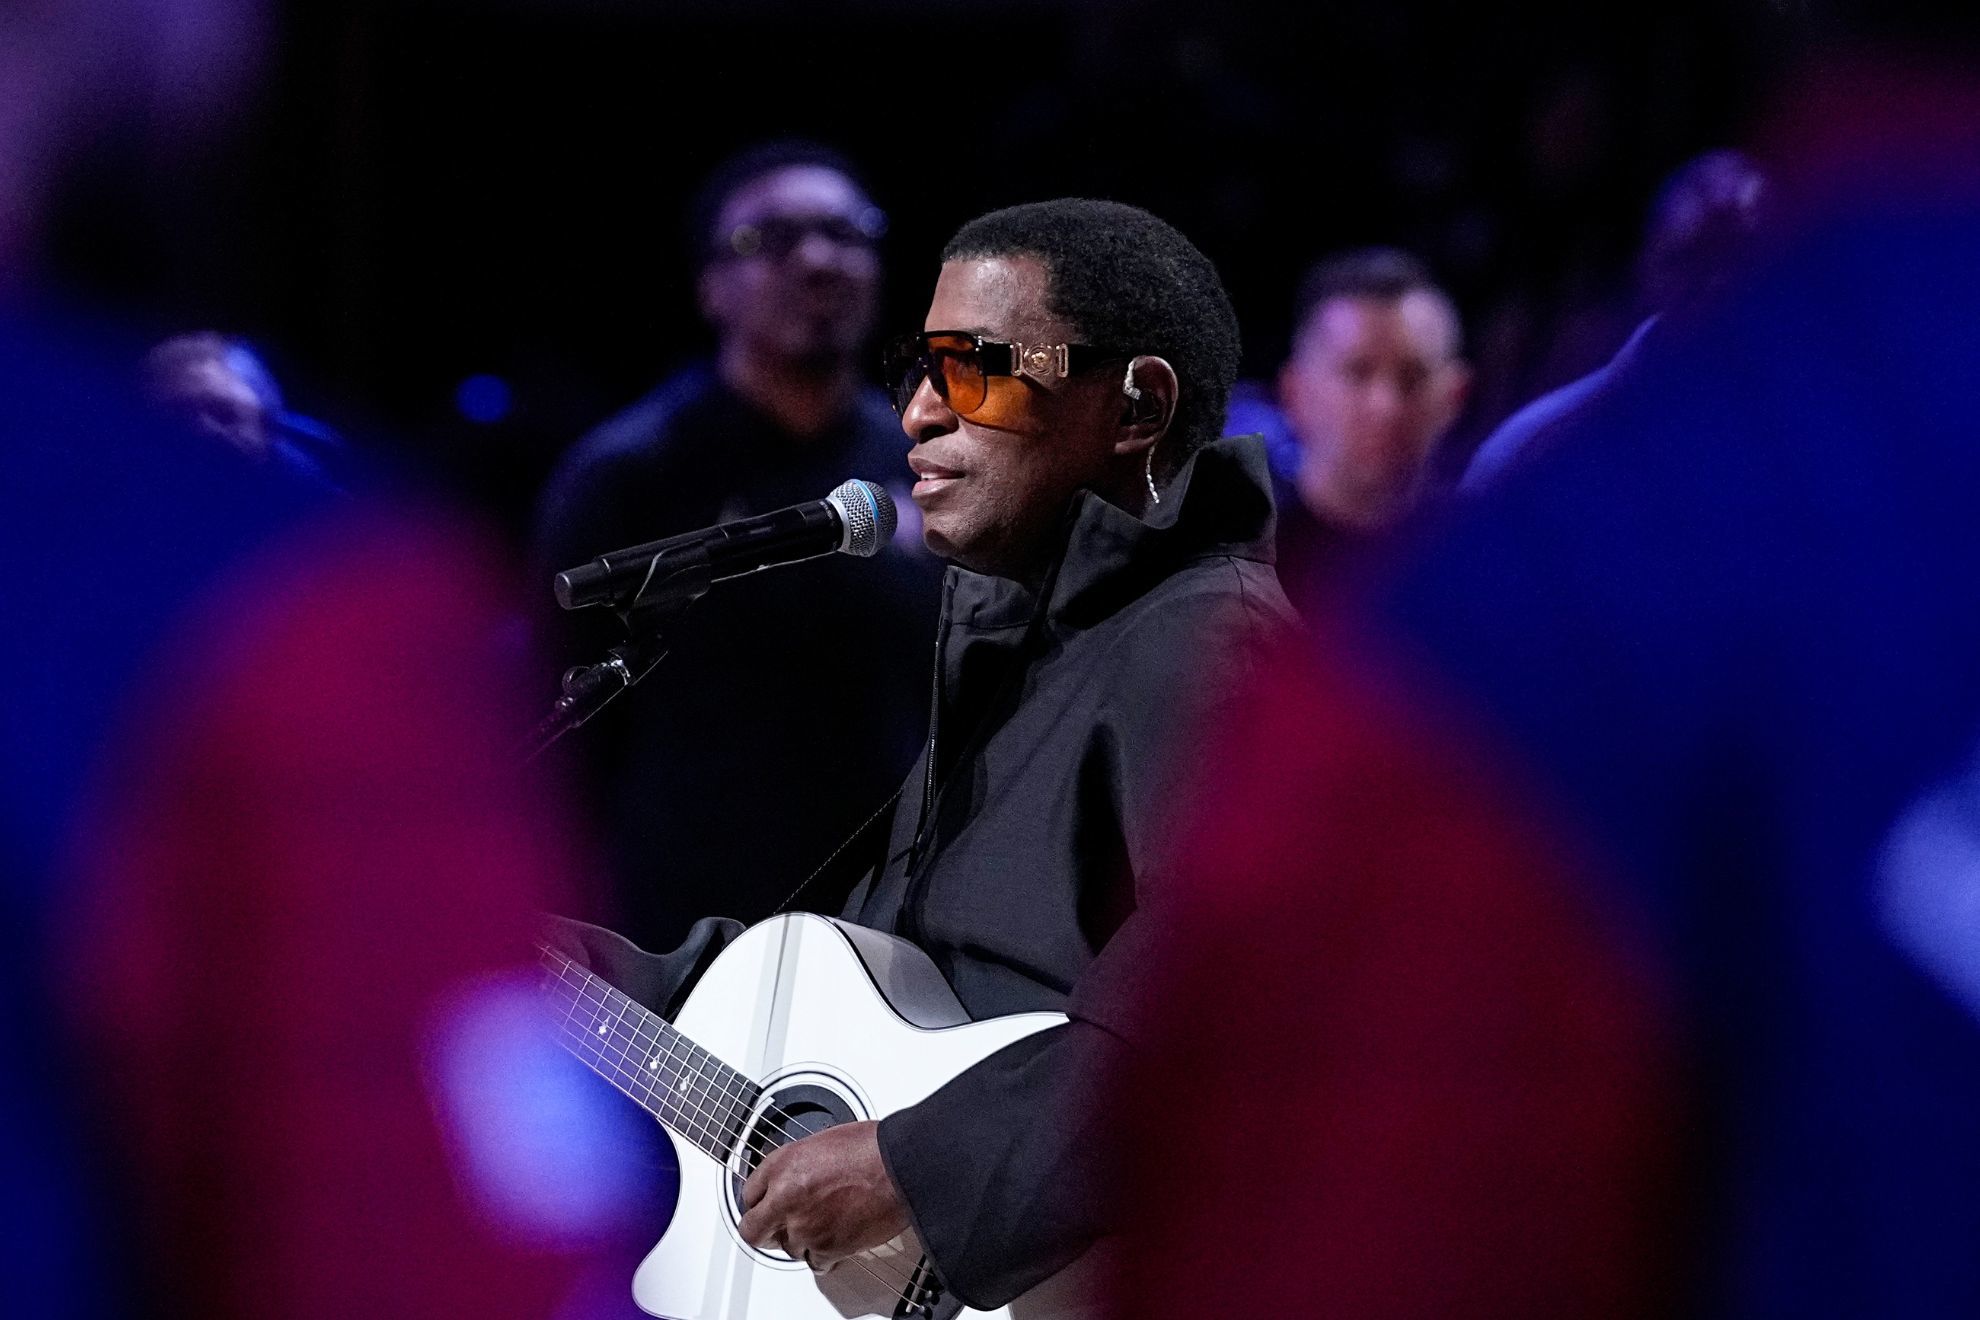 Who is Babyface? Indiana legend performs national anthem at All-Star Game